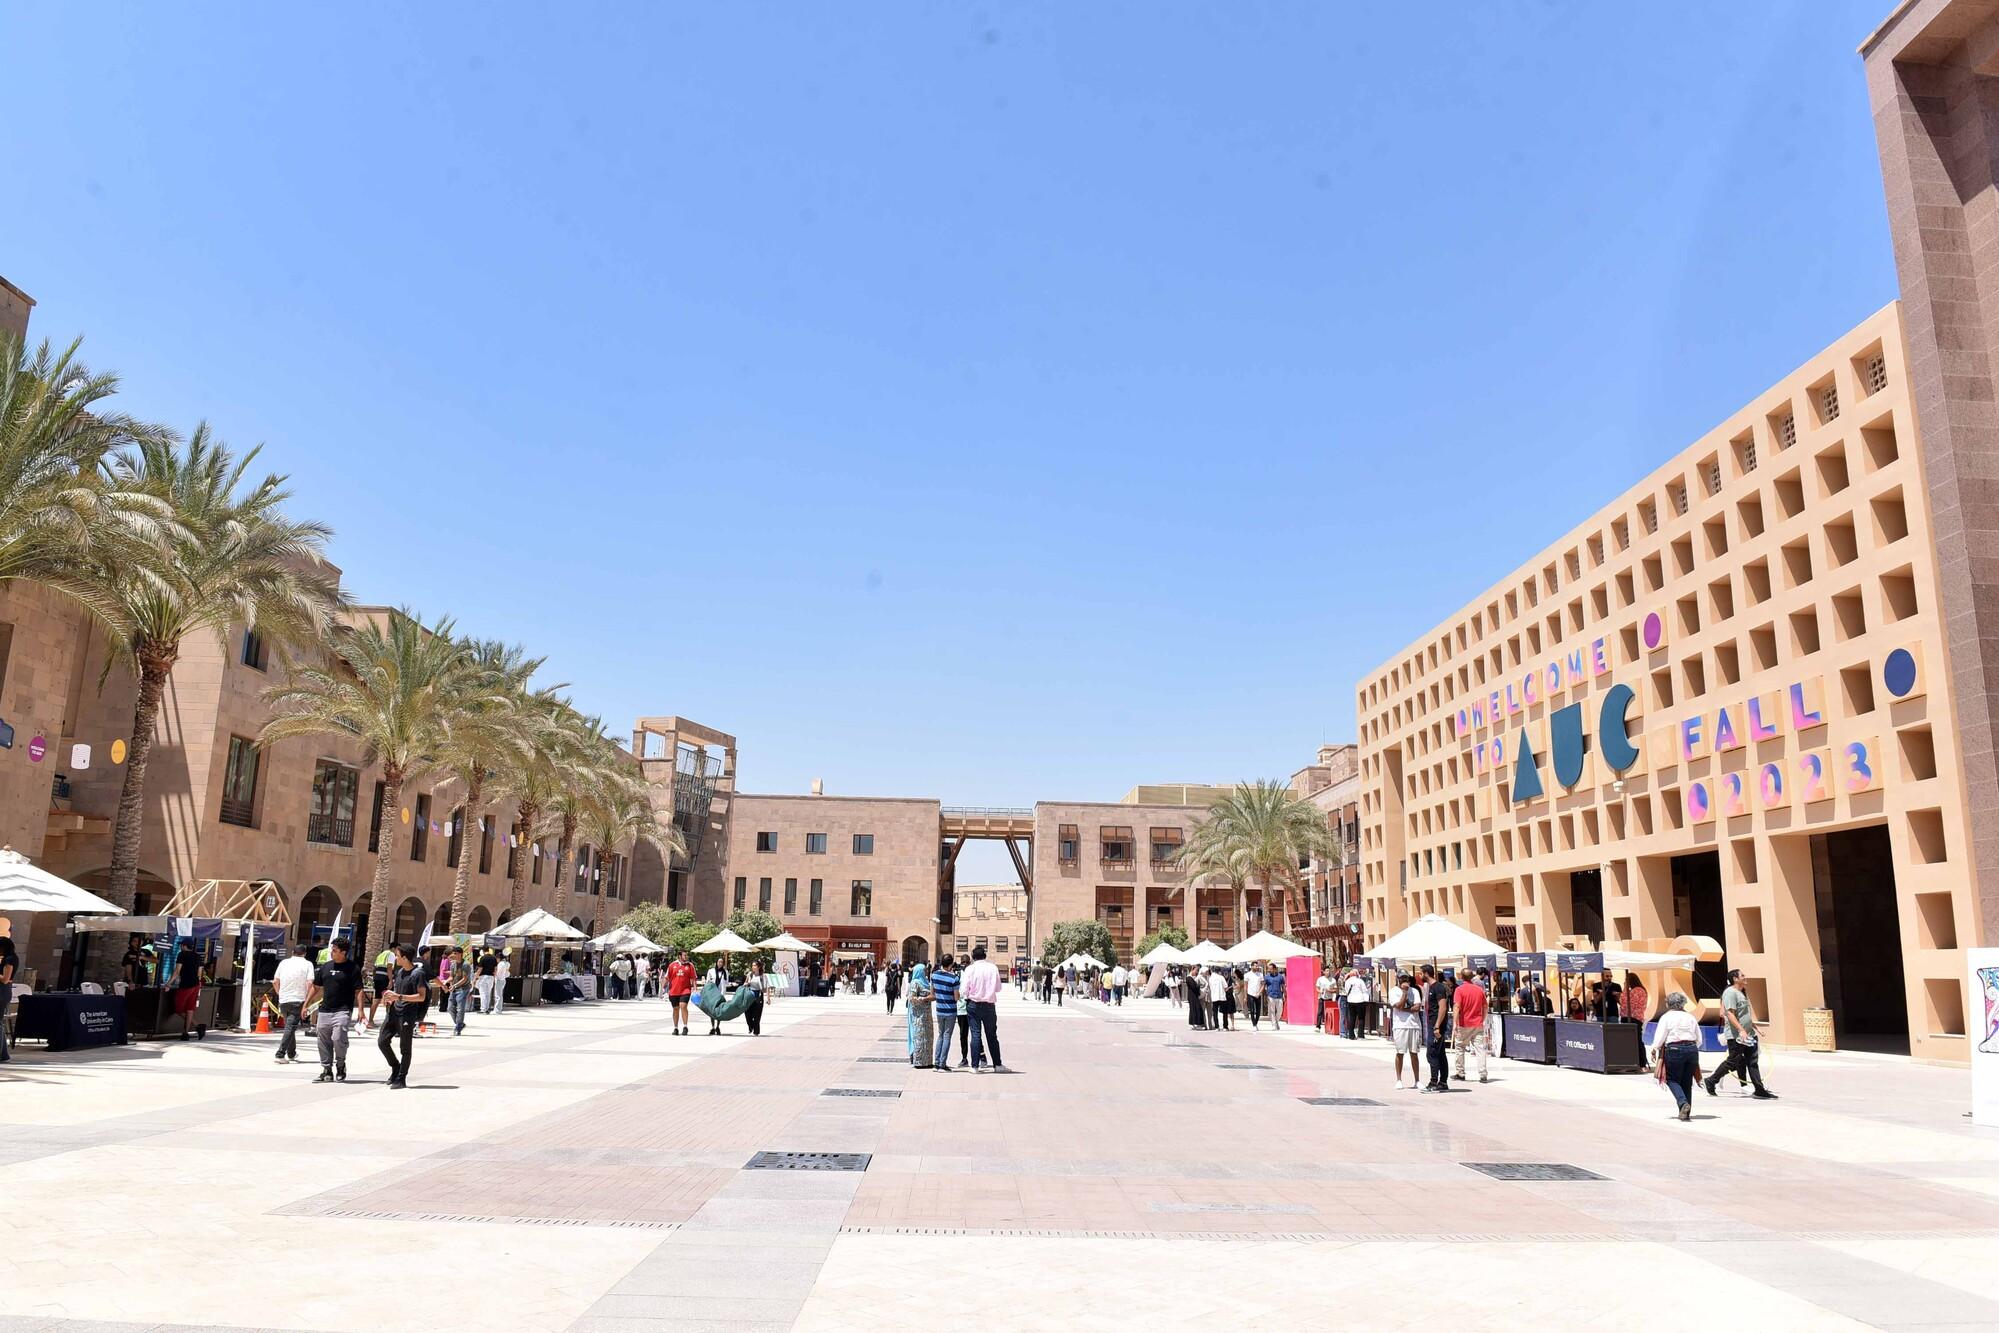 AUC campus plaza with students walking on campus